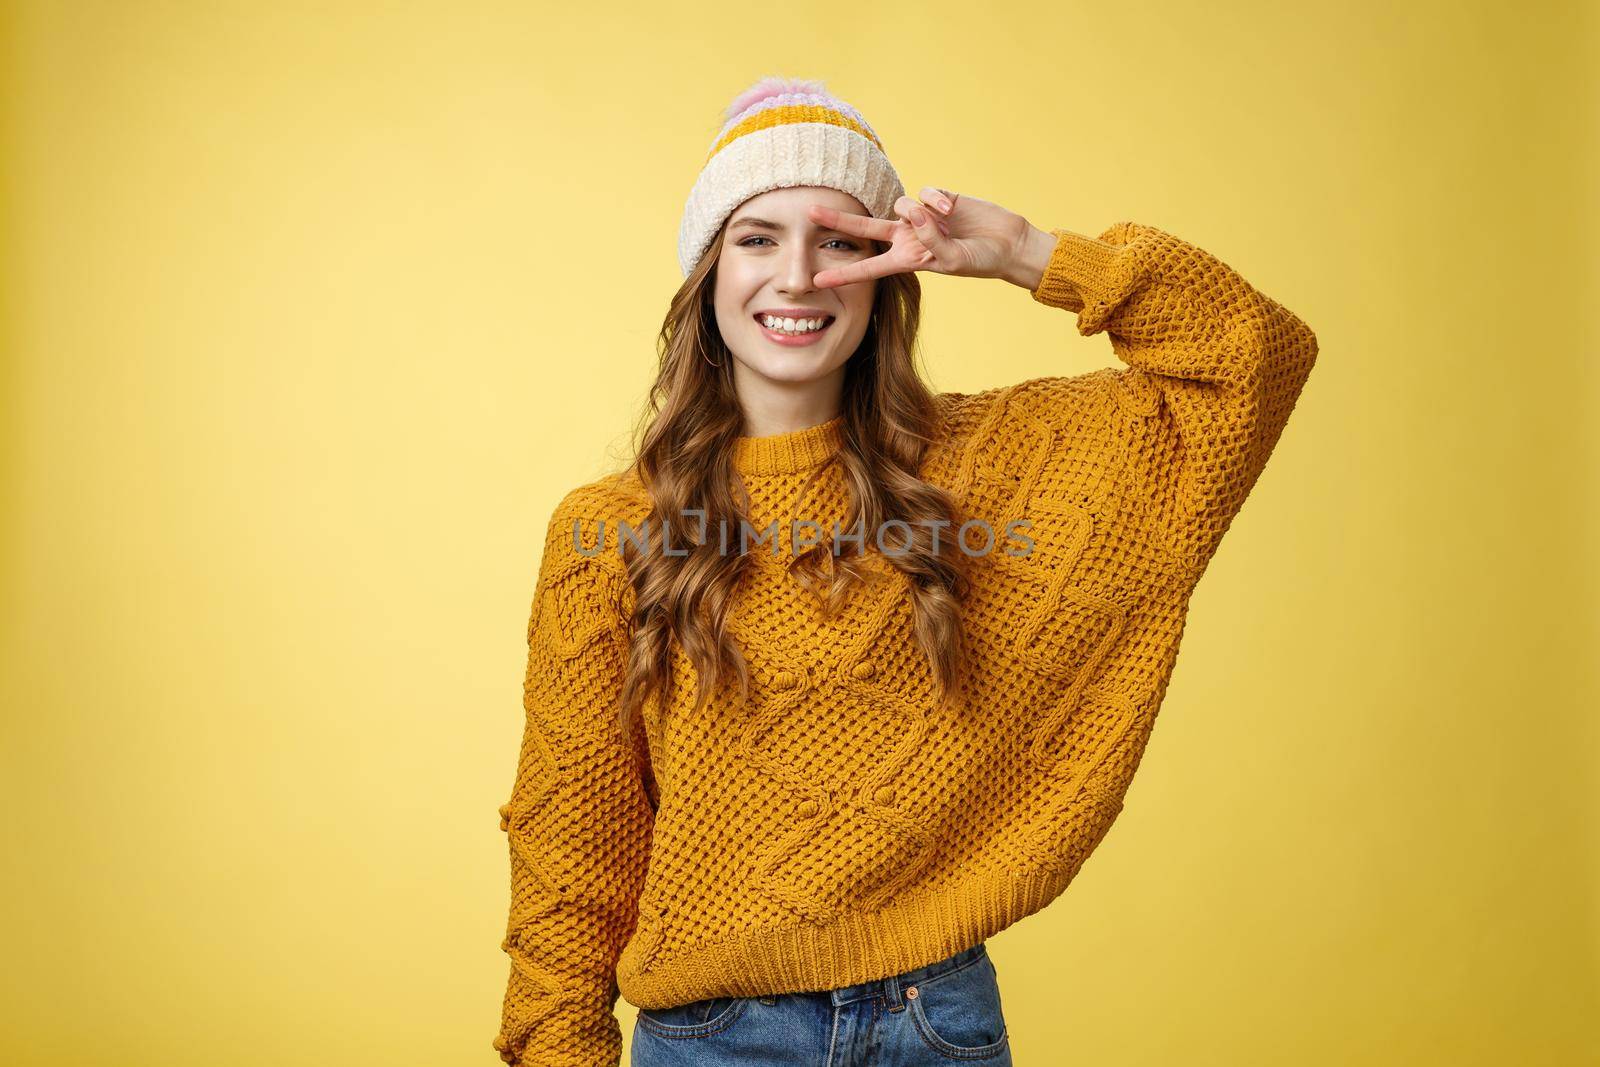 Positive peaceful kind charming young woman show peace victory gesture near eye smiling broadly have good mood perfect day wishing you good luck, standing cheerful grinning yellow background.